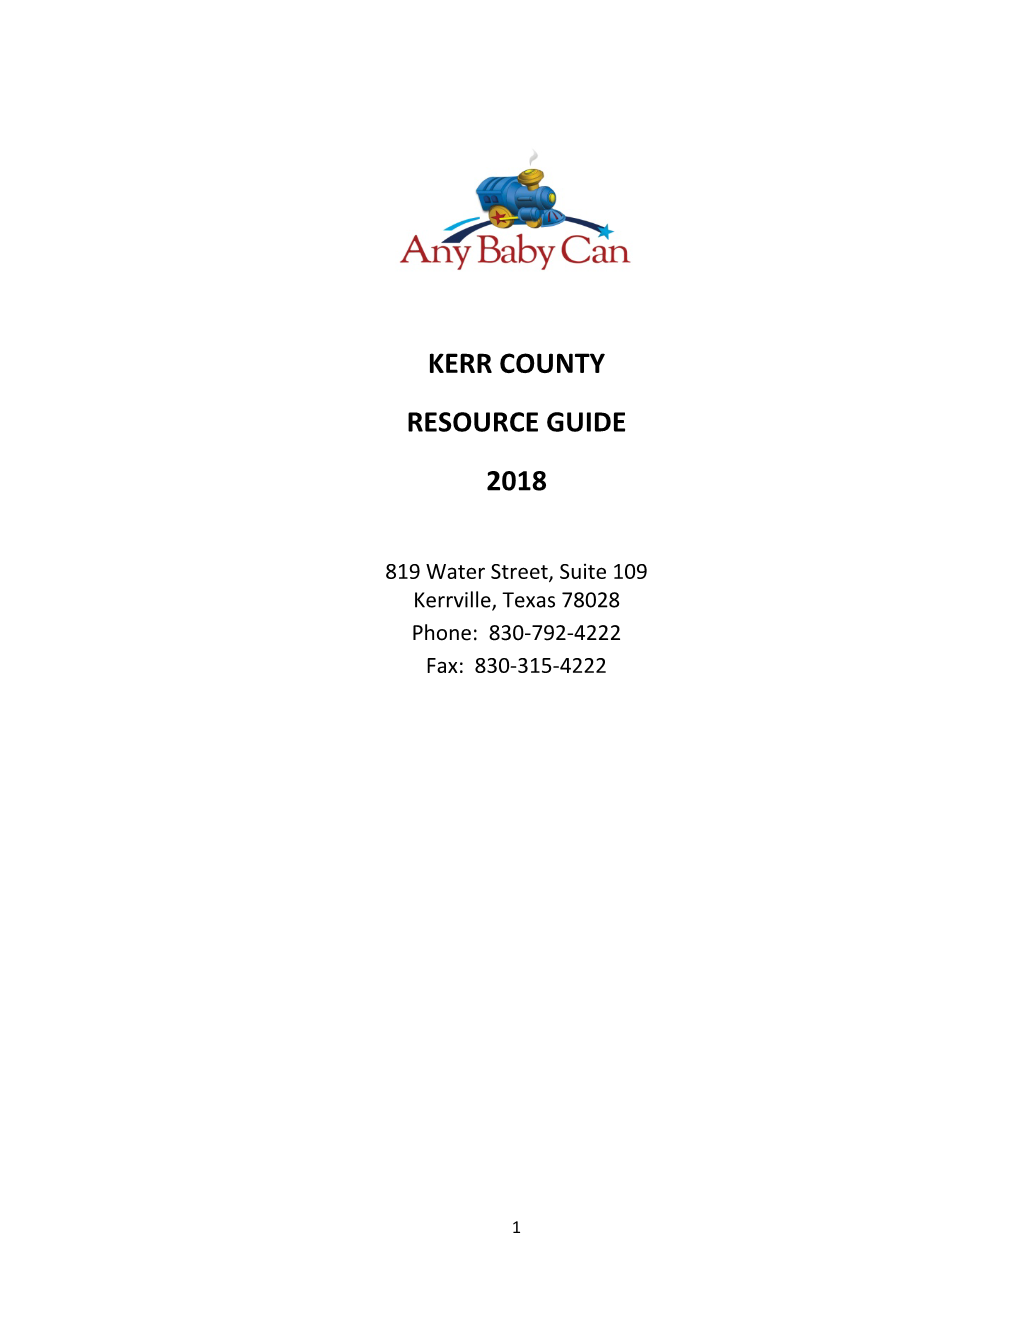 Kerr County Resource Guide 2018